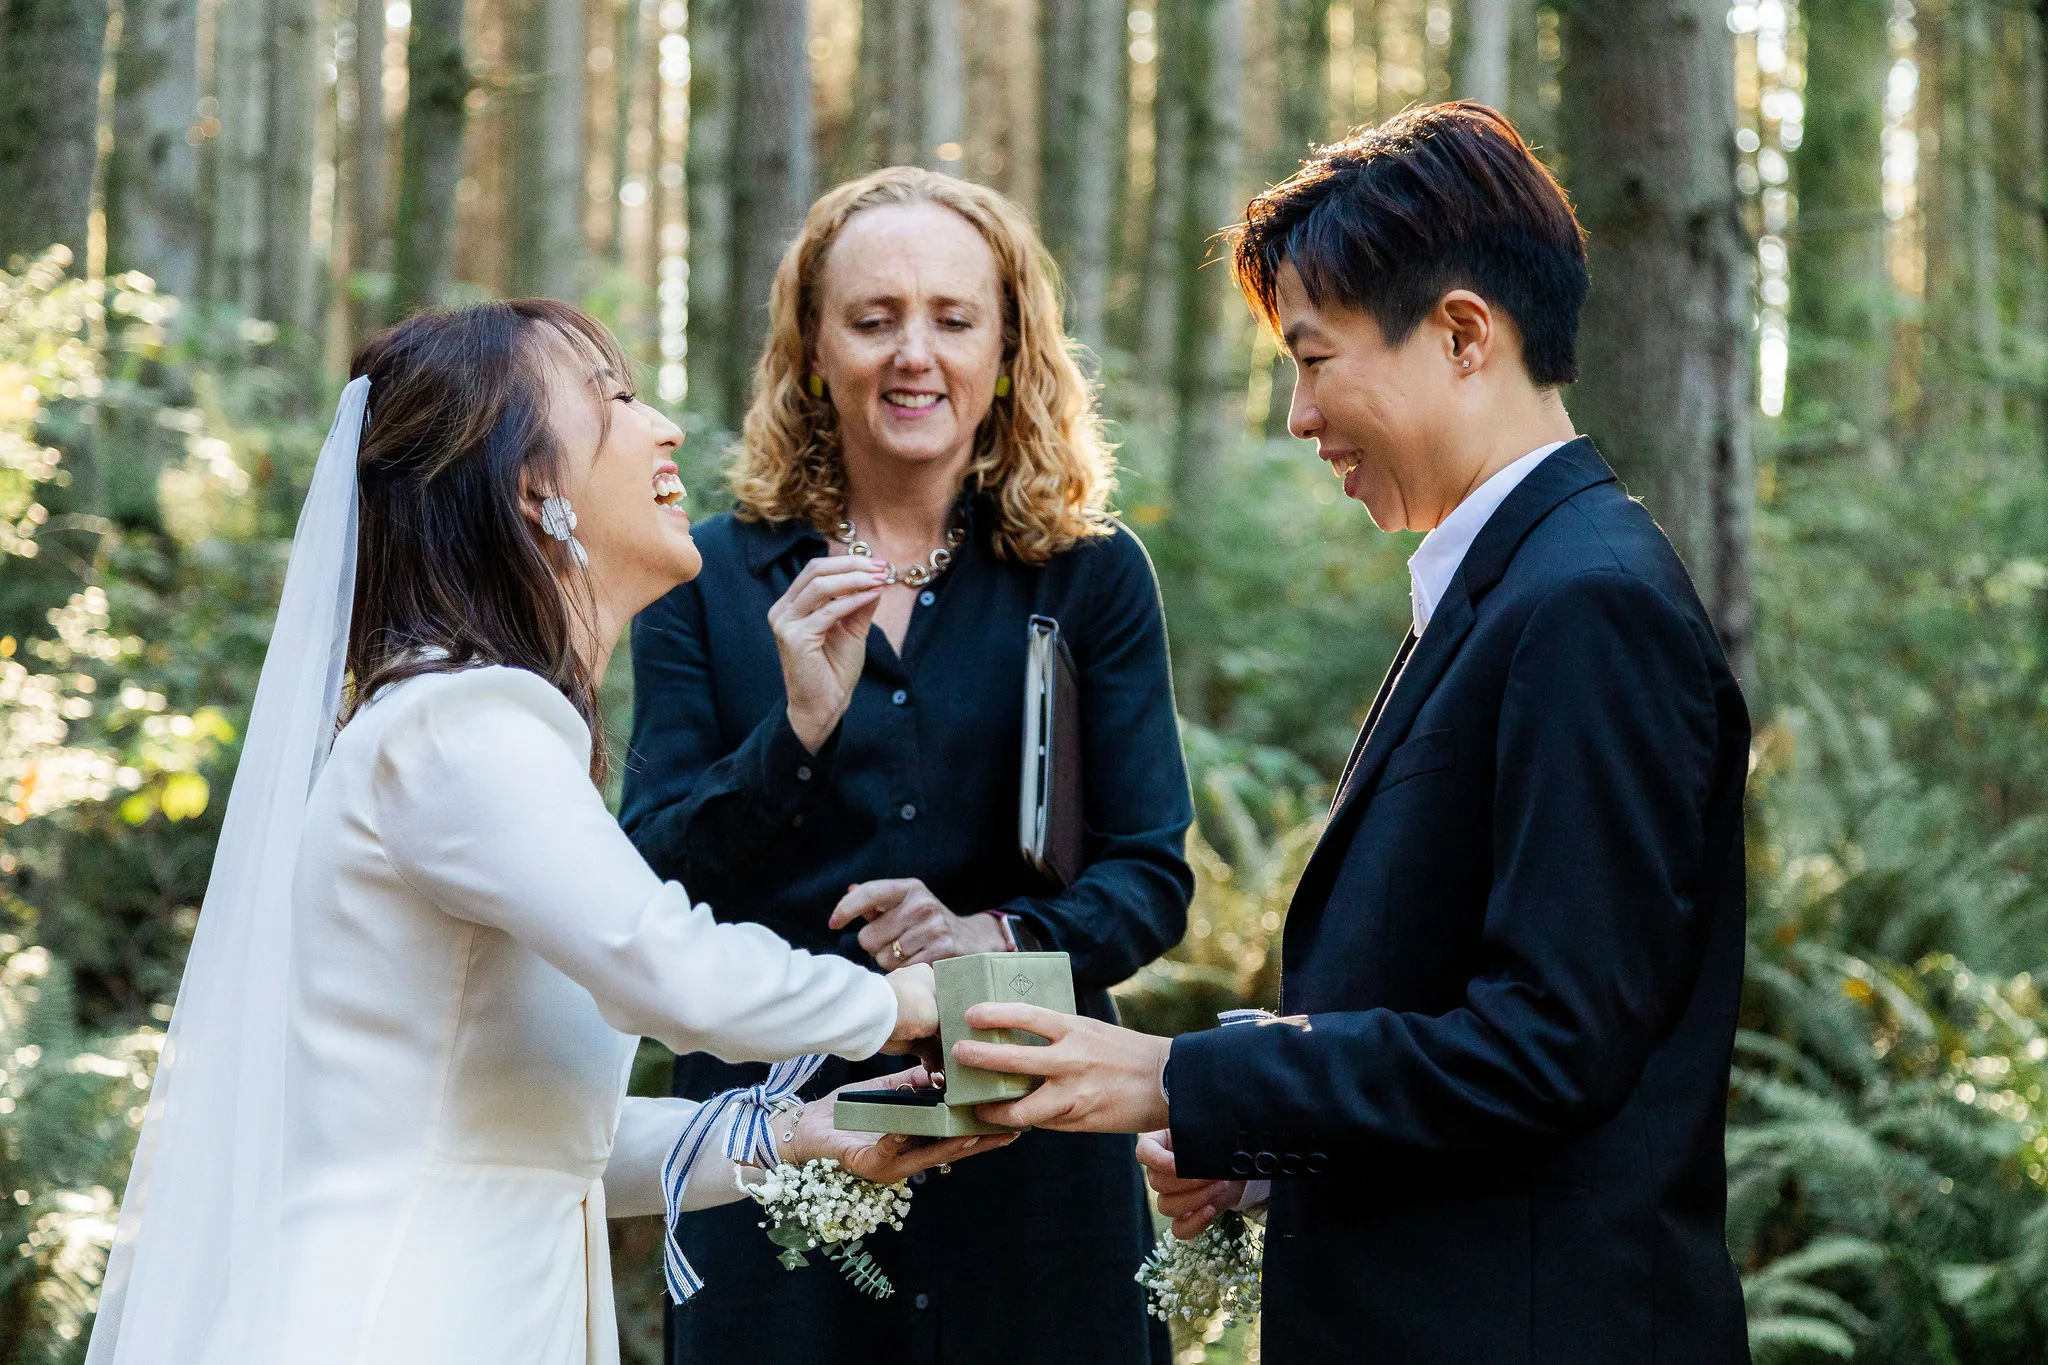 Stanley Park elopement with Young Hip & Married officiant Jane Halton